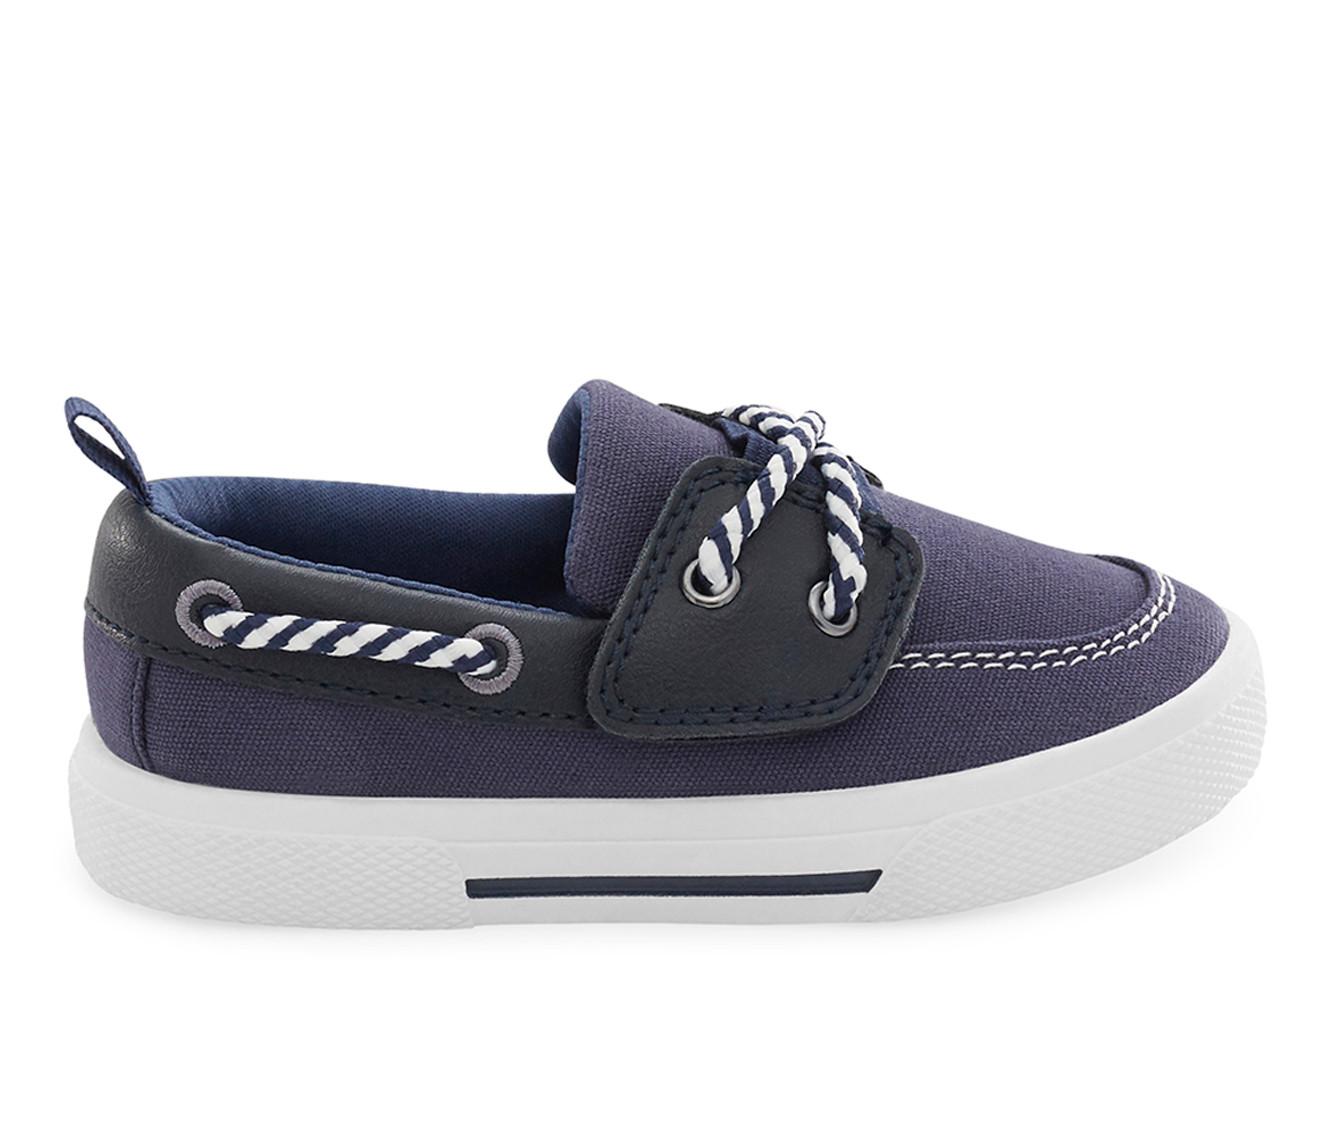 Kids' Carters Infant & Toddler & Little Kid Cosmo Boat Shoes